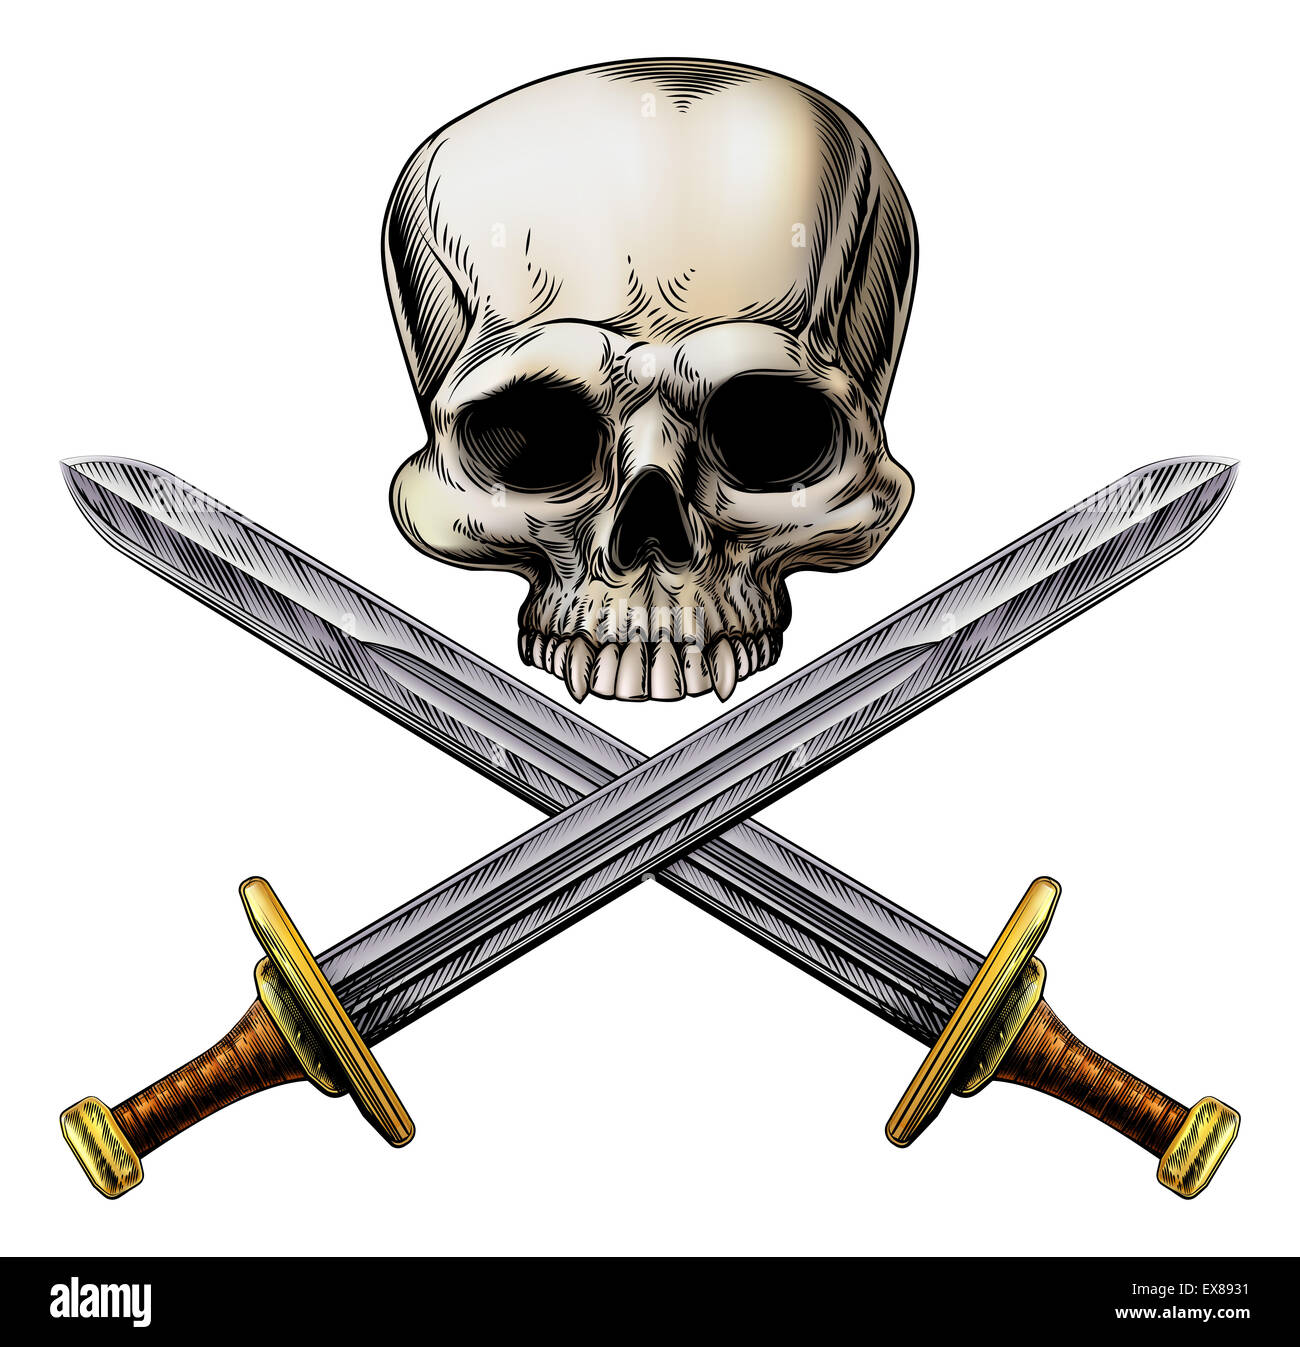 A human skull and crossed swords pirate style sign in a vintage woodblock style Stock Photo